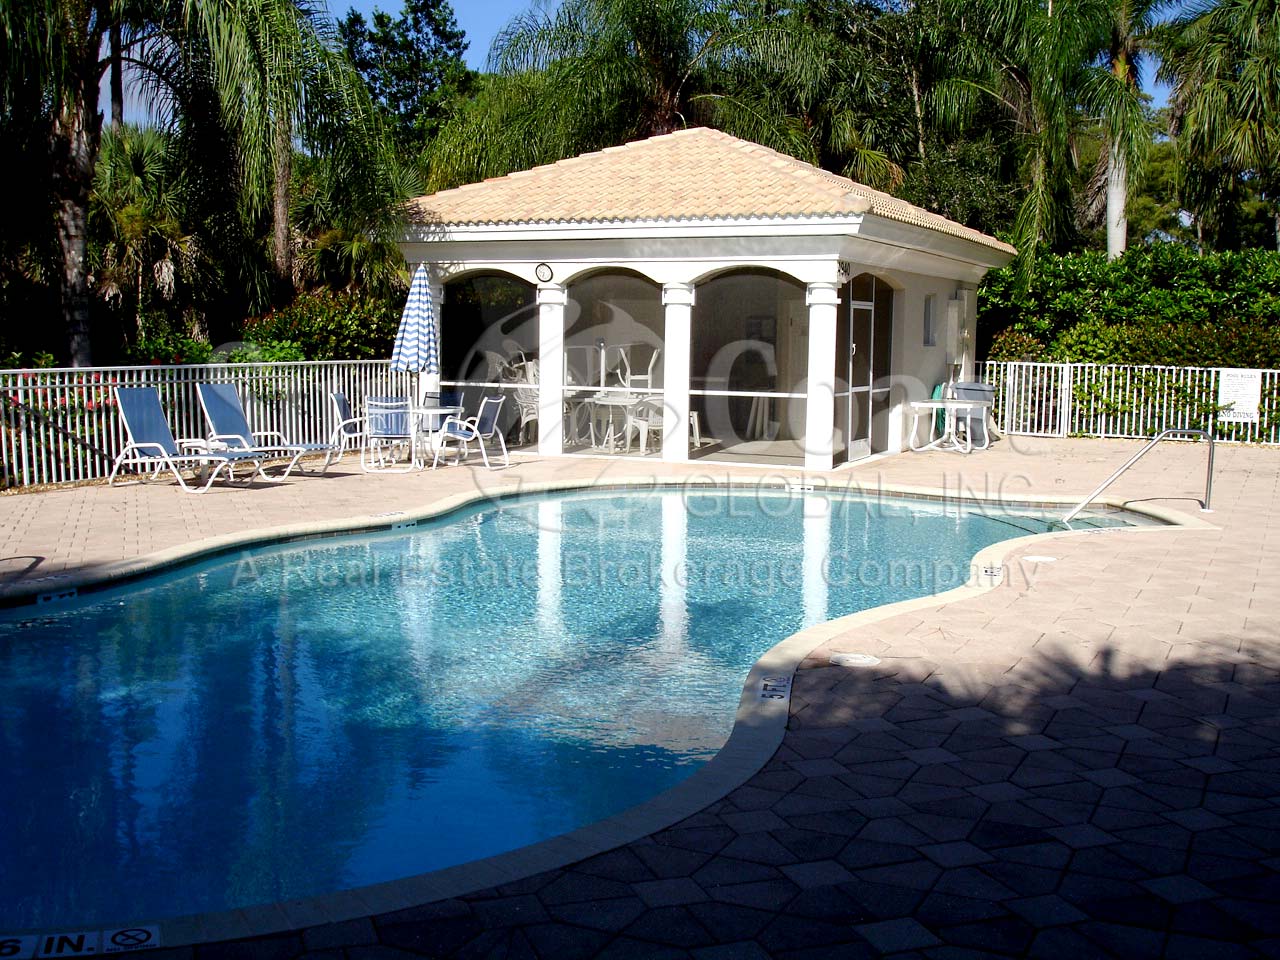 Providence Village has a pavered pool area with a 3 ft - 5-1/2 ft pool.